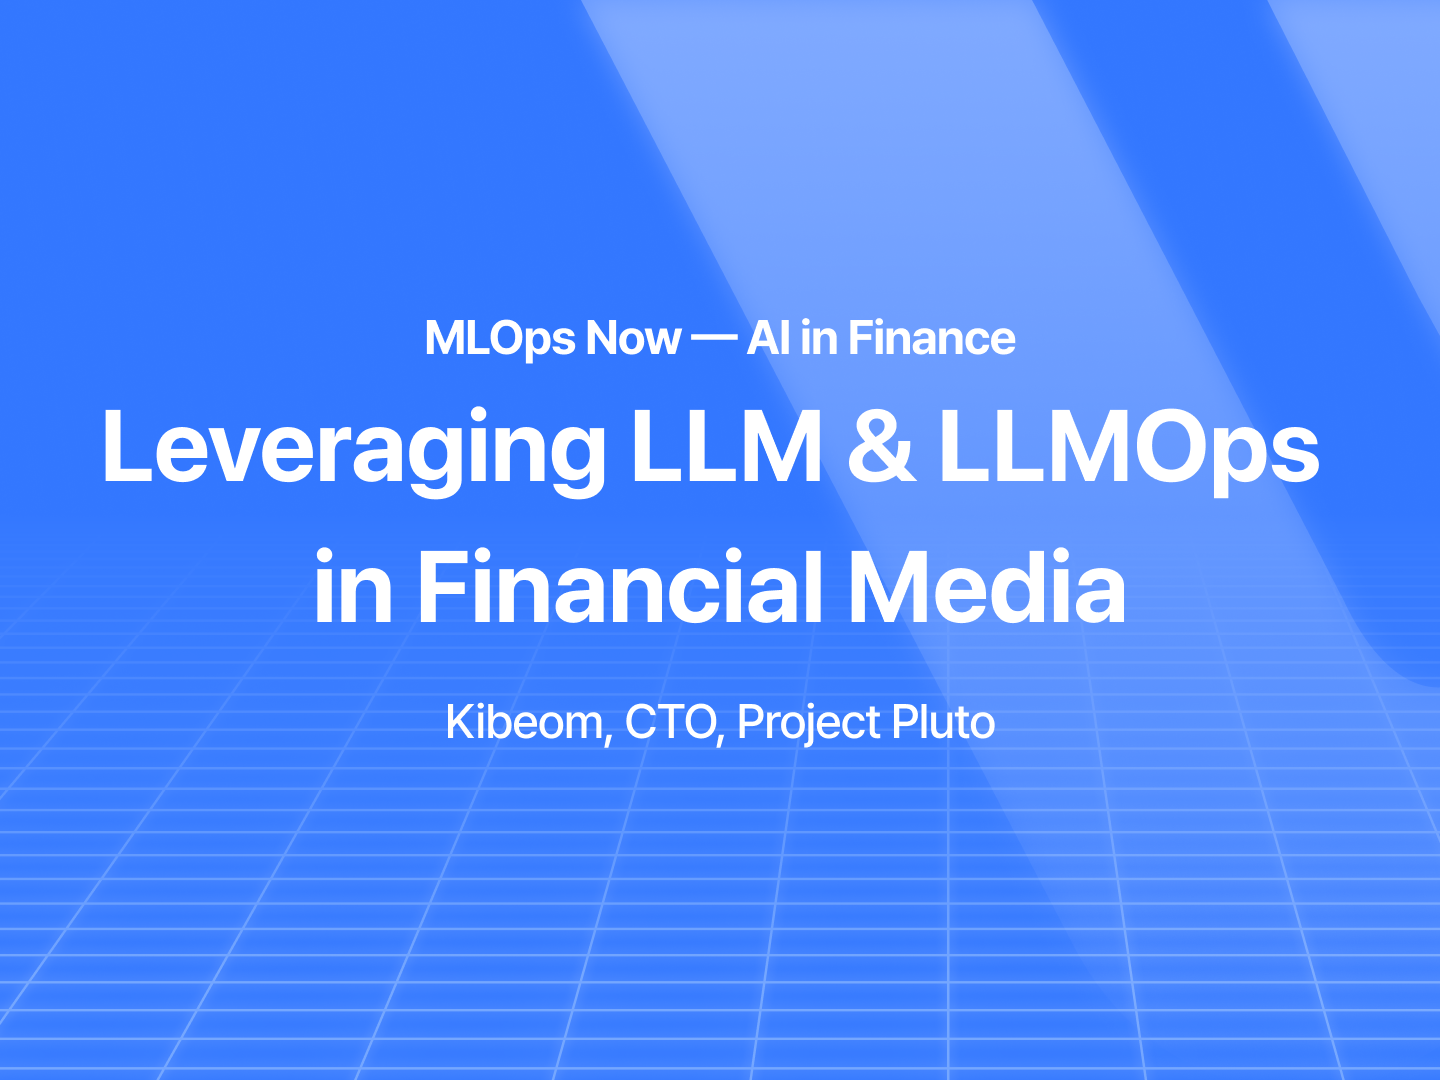 [Insights from MLOps Now] Project Pluto — Leveraging LLMs & LLMOps in financial media